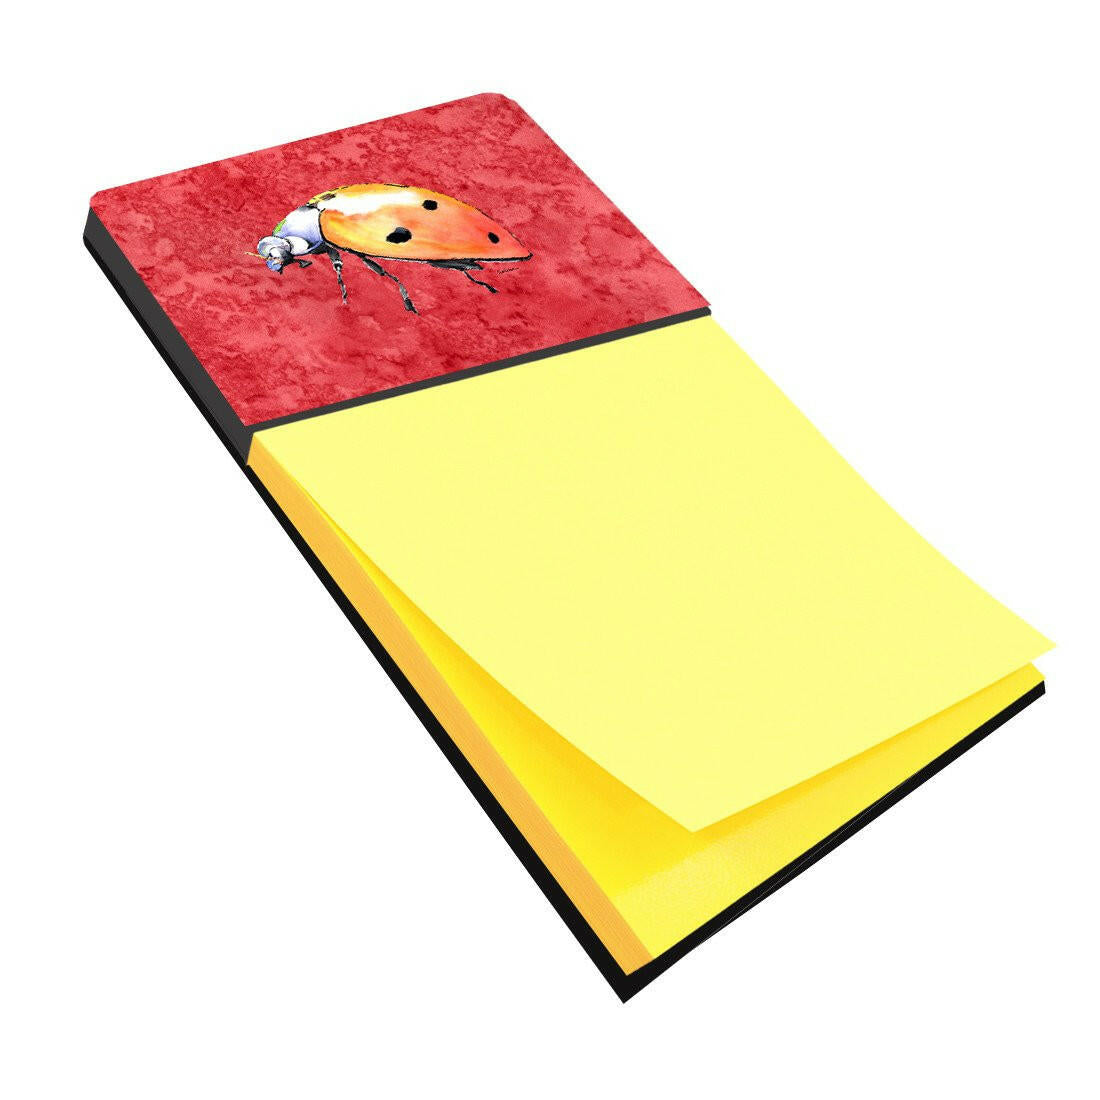 Lady Bug on Red Refiillable Sticky Note Holder or Postit Note Dispenser 8868SN by Caroline's Treasures